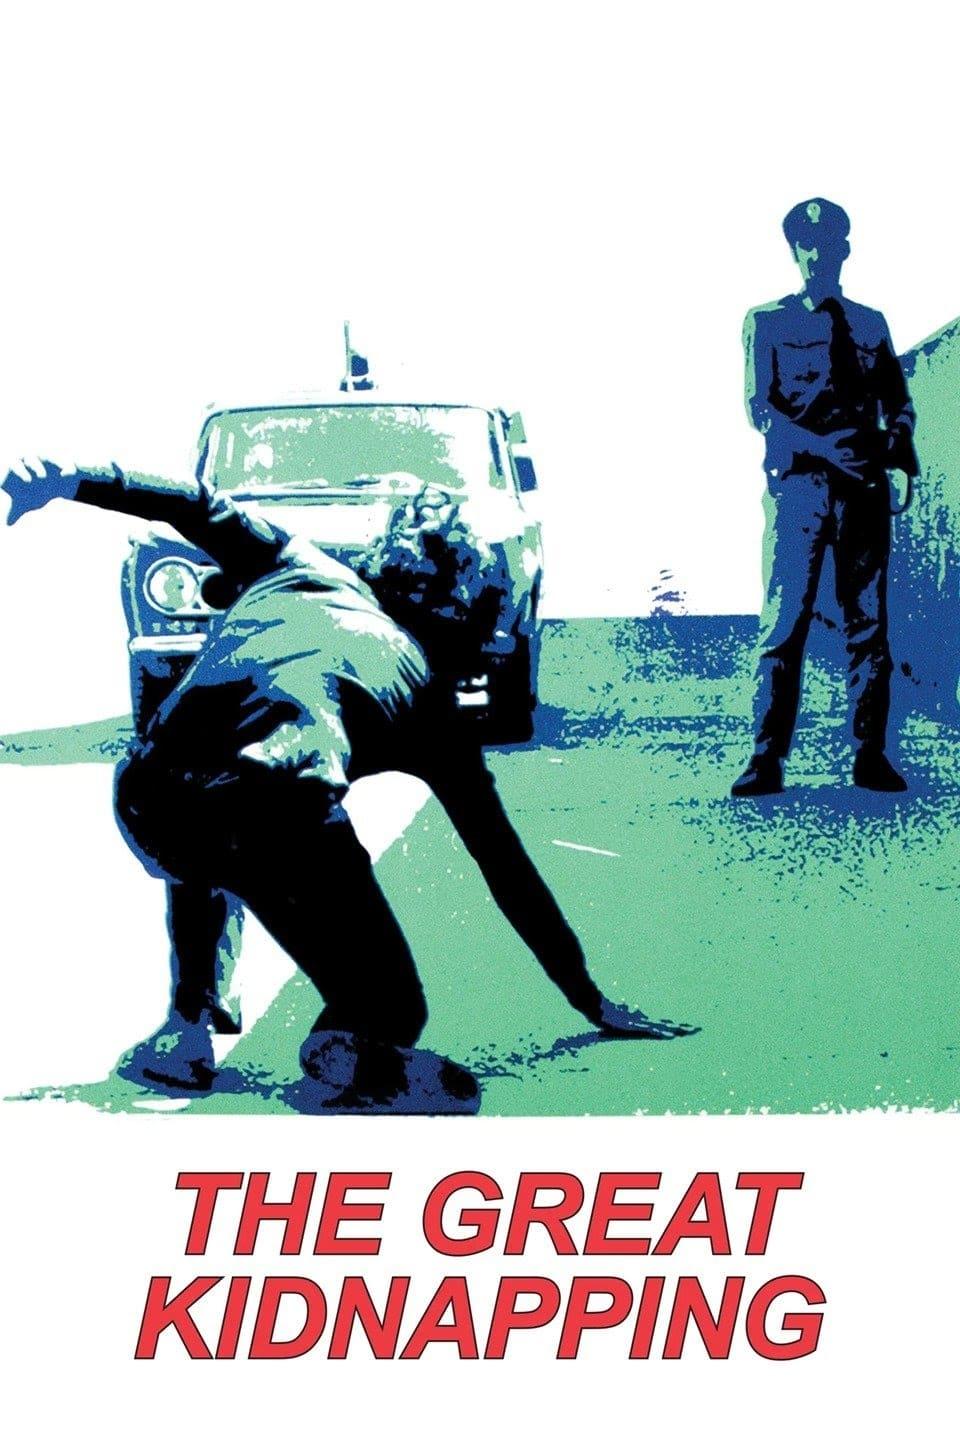 The Great Kidnapping poster